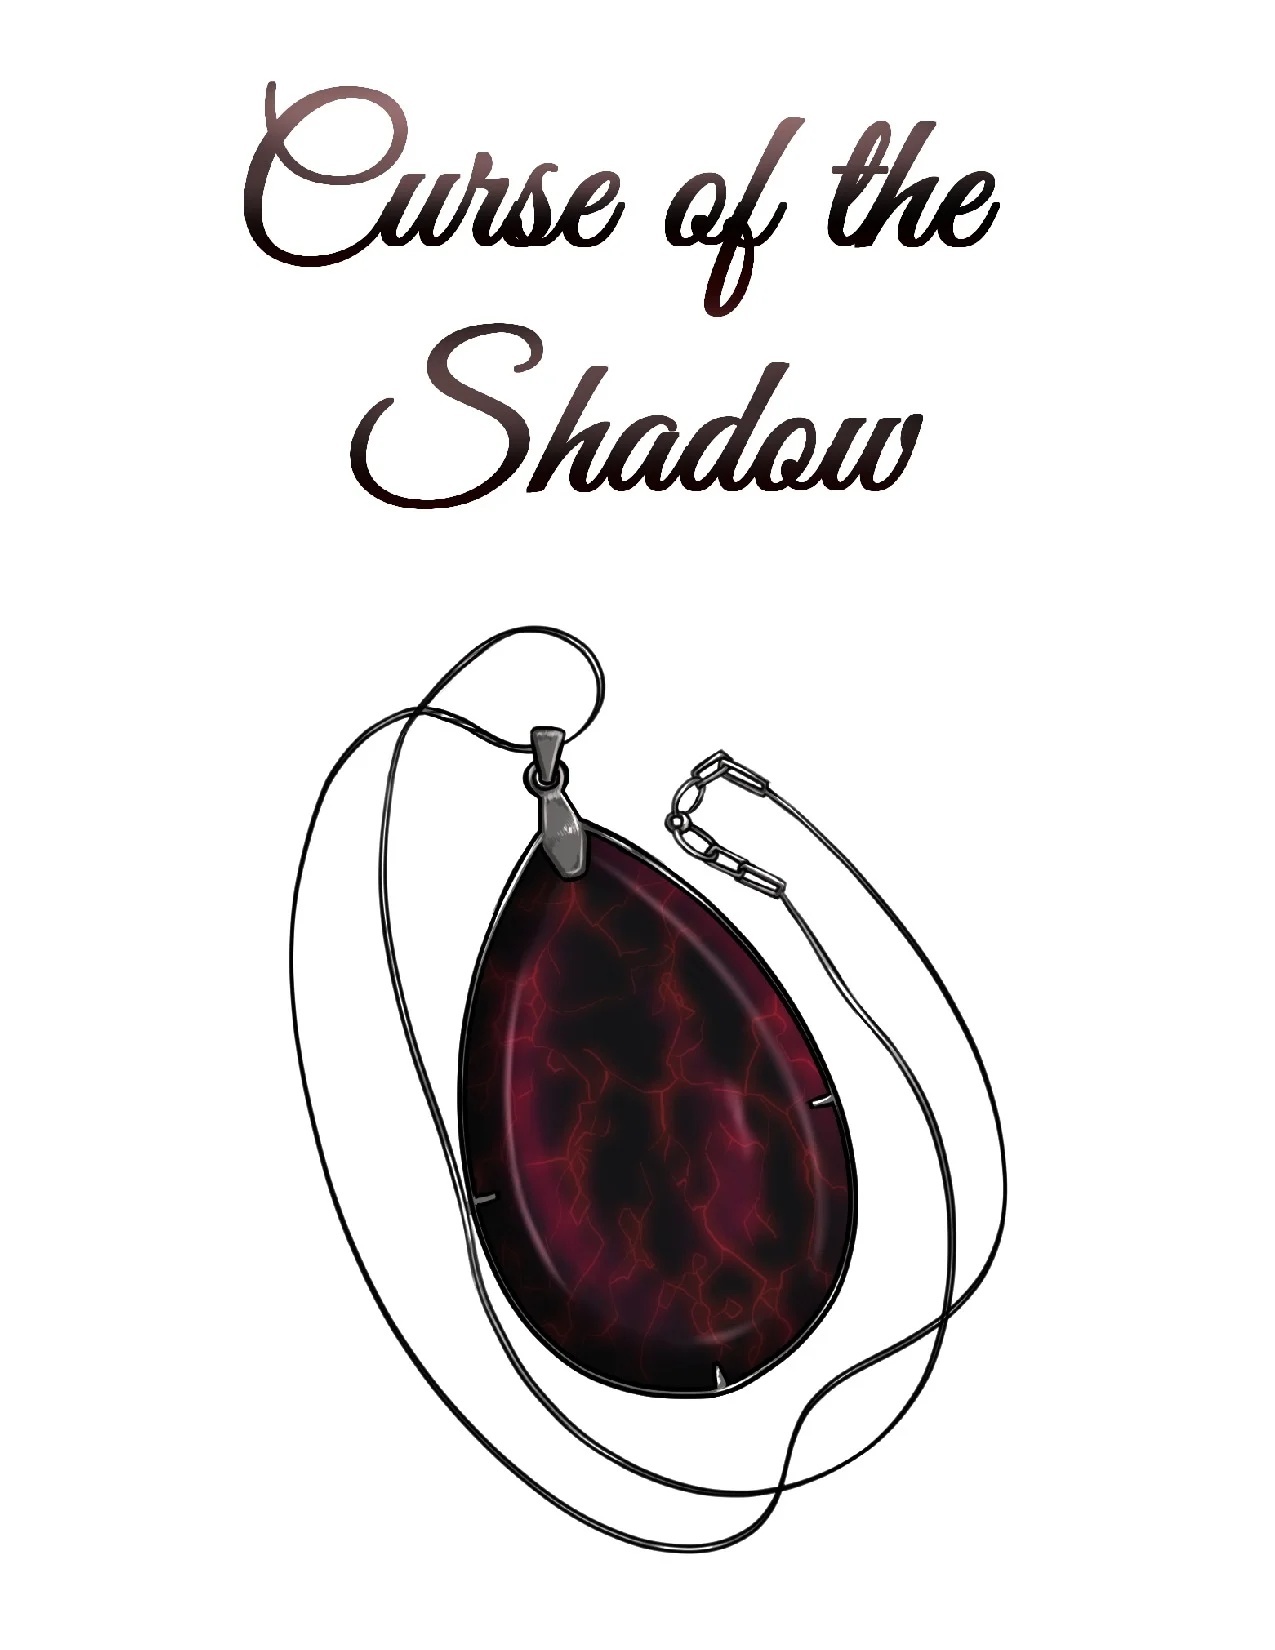 Curse Of The Shadows (completo) - 21